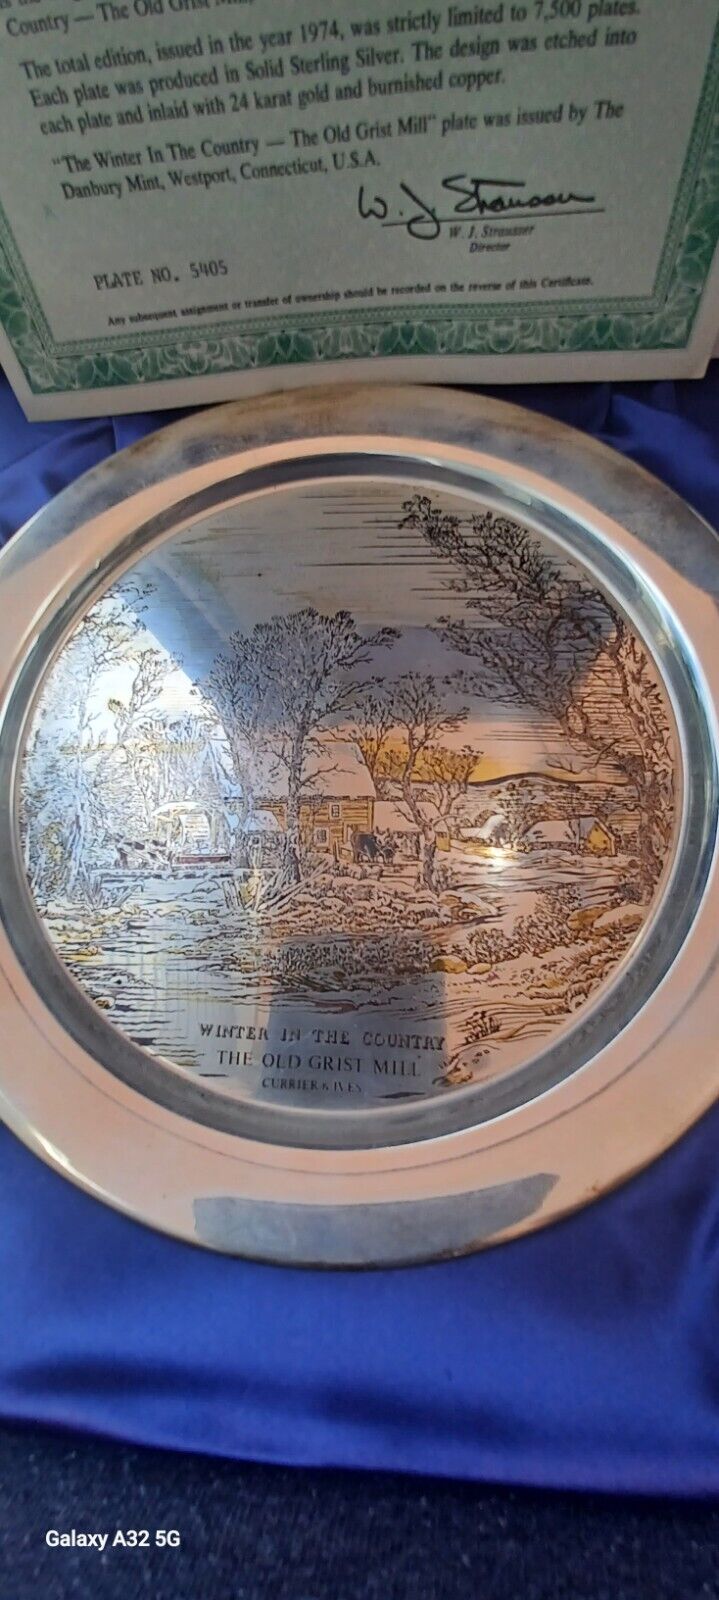 1974 Danbury Mint Currier & Ives The Old Grist Mill Sterling Silver Plate